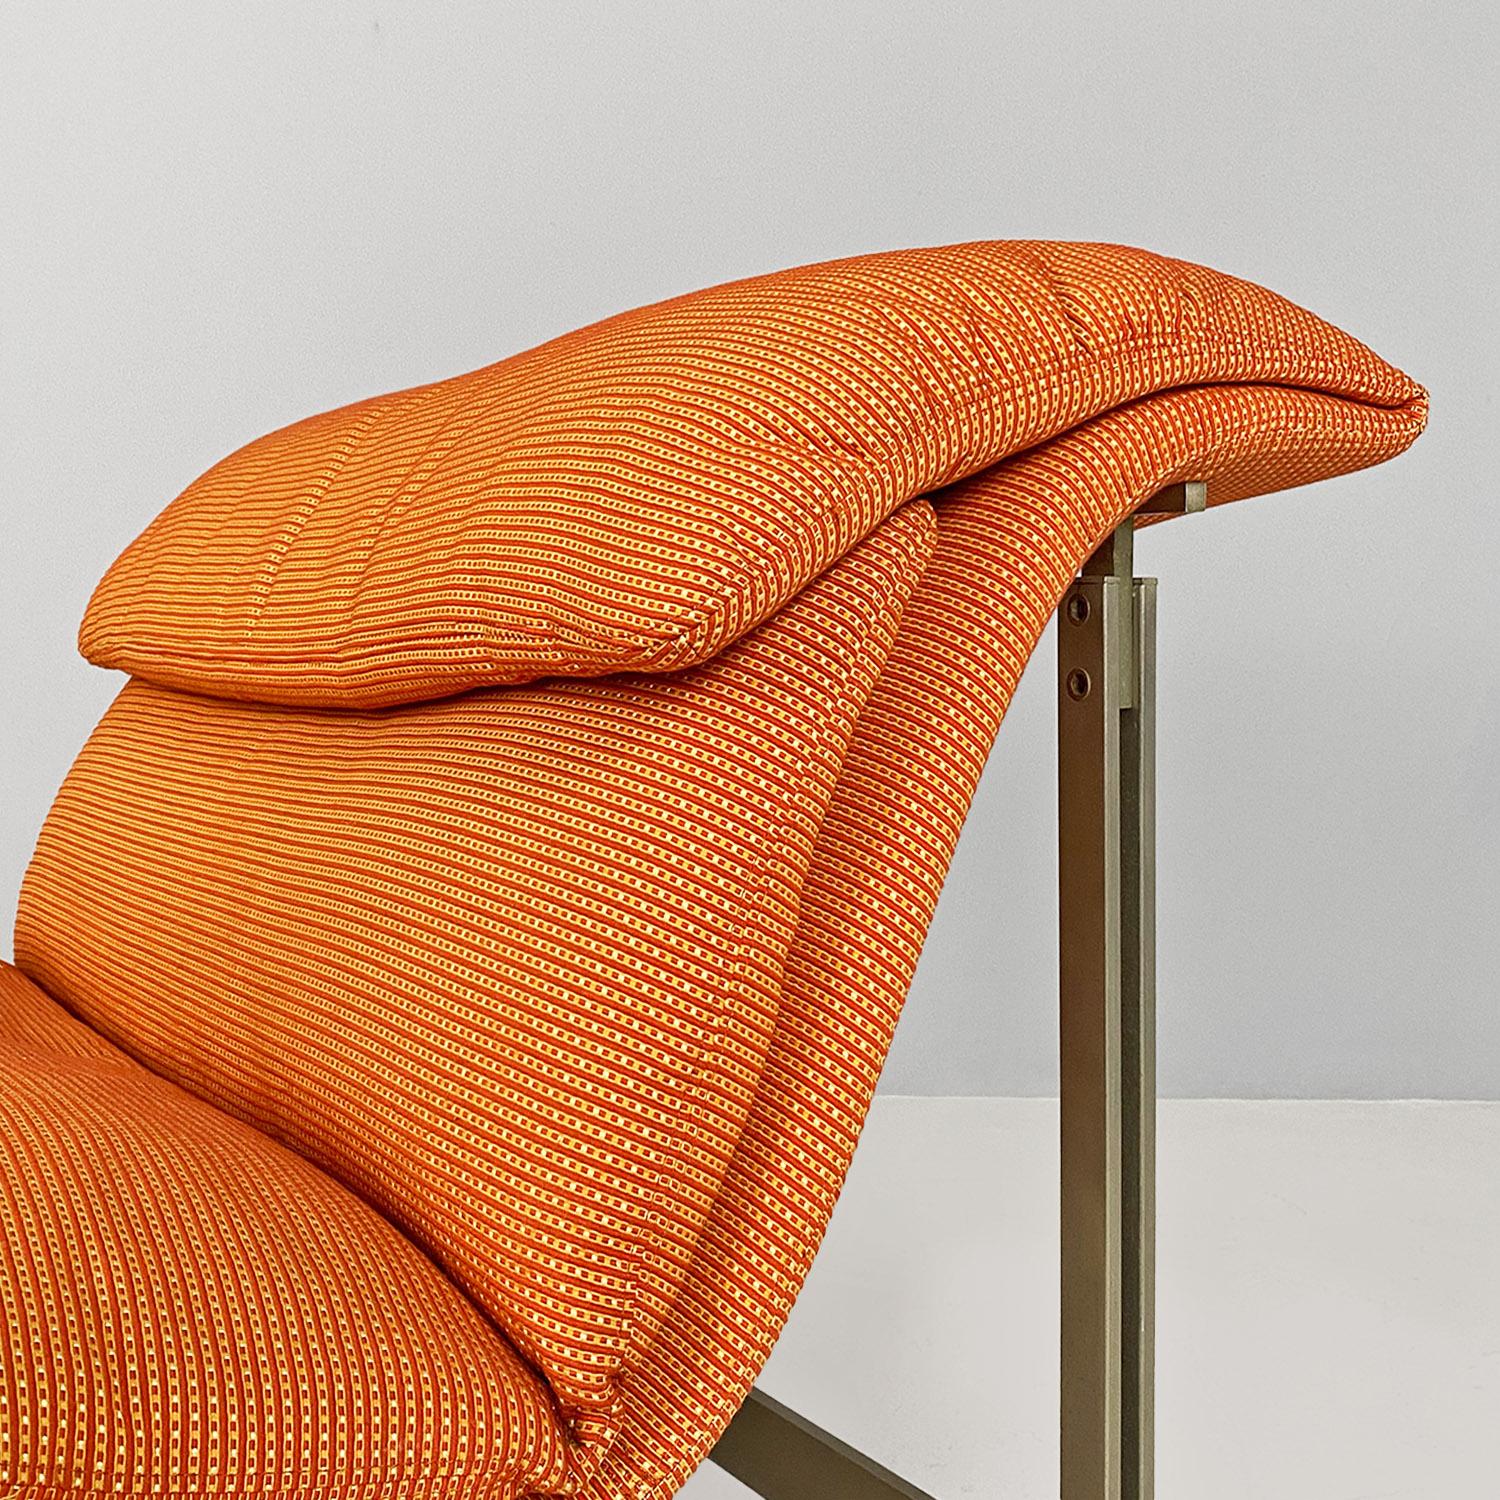 Italian modern steel and fabric Wave armchair by Giovanni Offredi, Saporiti 1974 For Sale 3